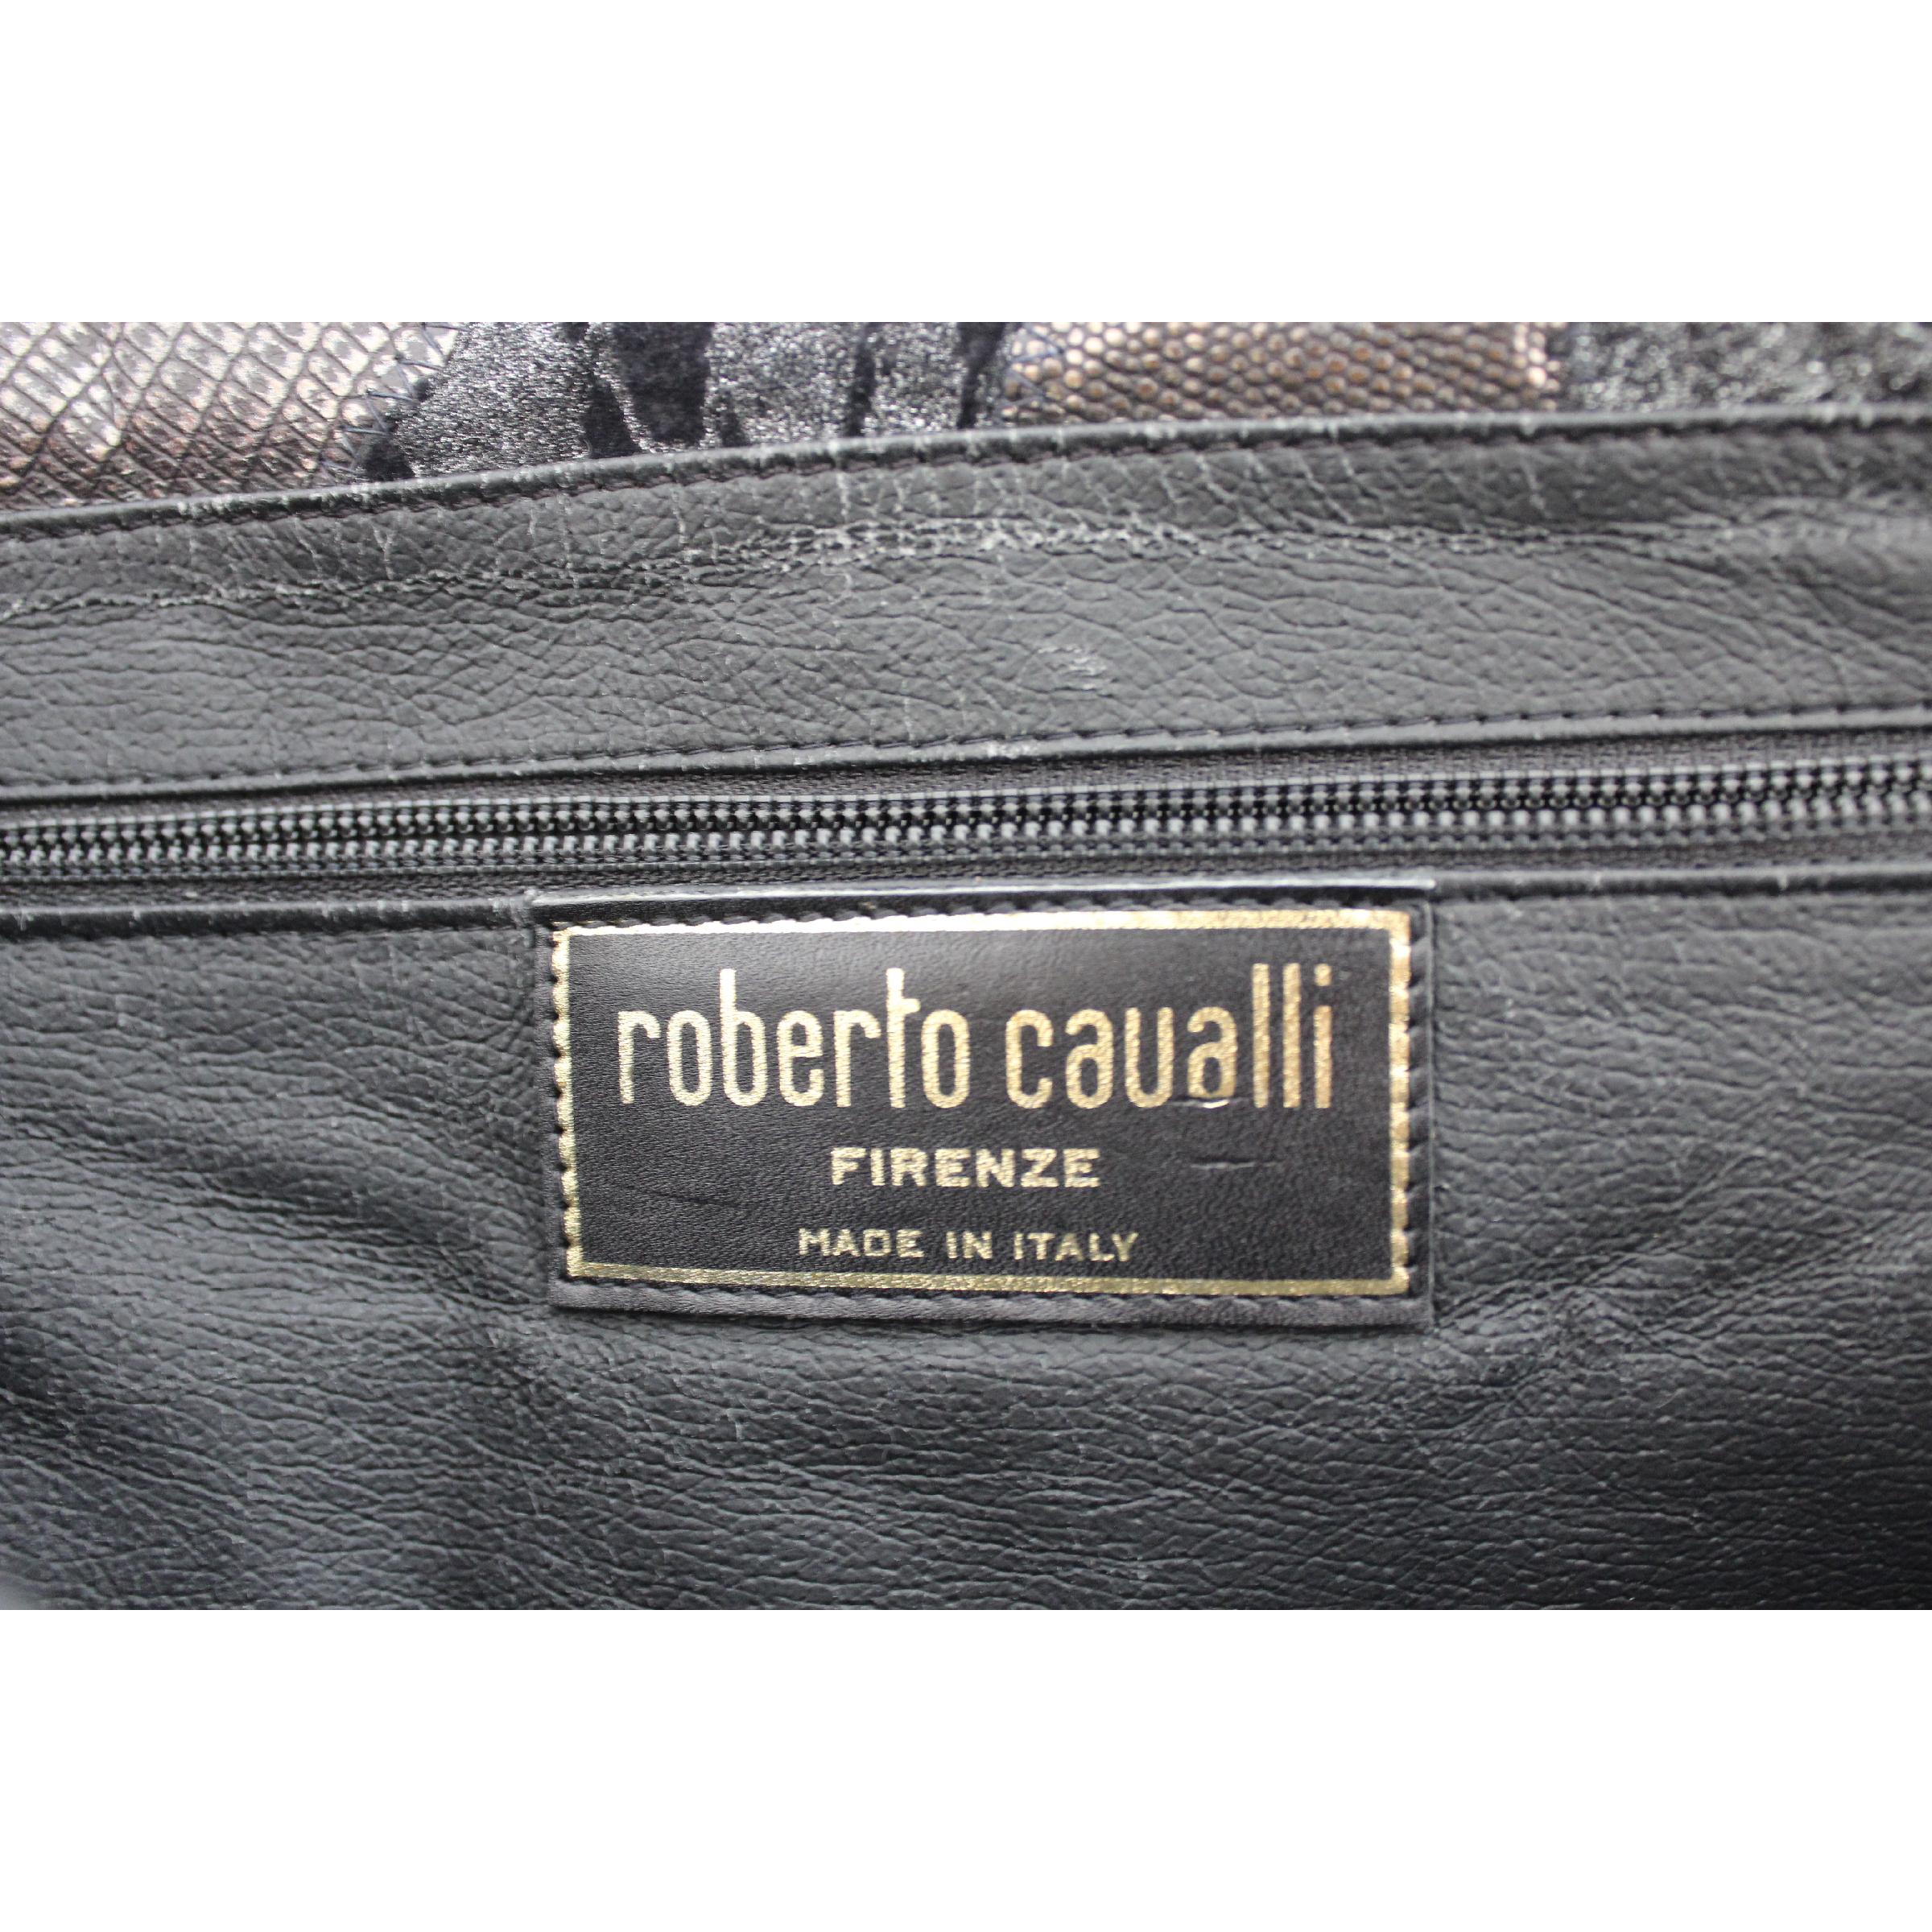 Roberto Cavalli vintage handbag, 100% leather, black and silver color, internal partitions with zip. 1990s. Made in Italy. Very good vintage condition, some imperfections have small signs of use.

Height: 25 cm

Width: 40 cm

Depth: 4 cm